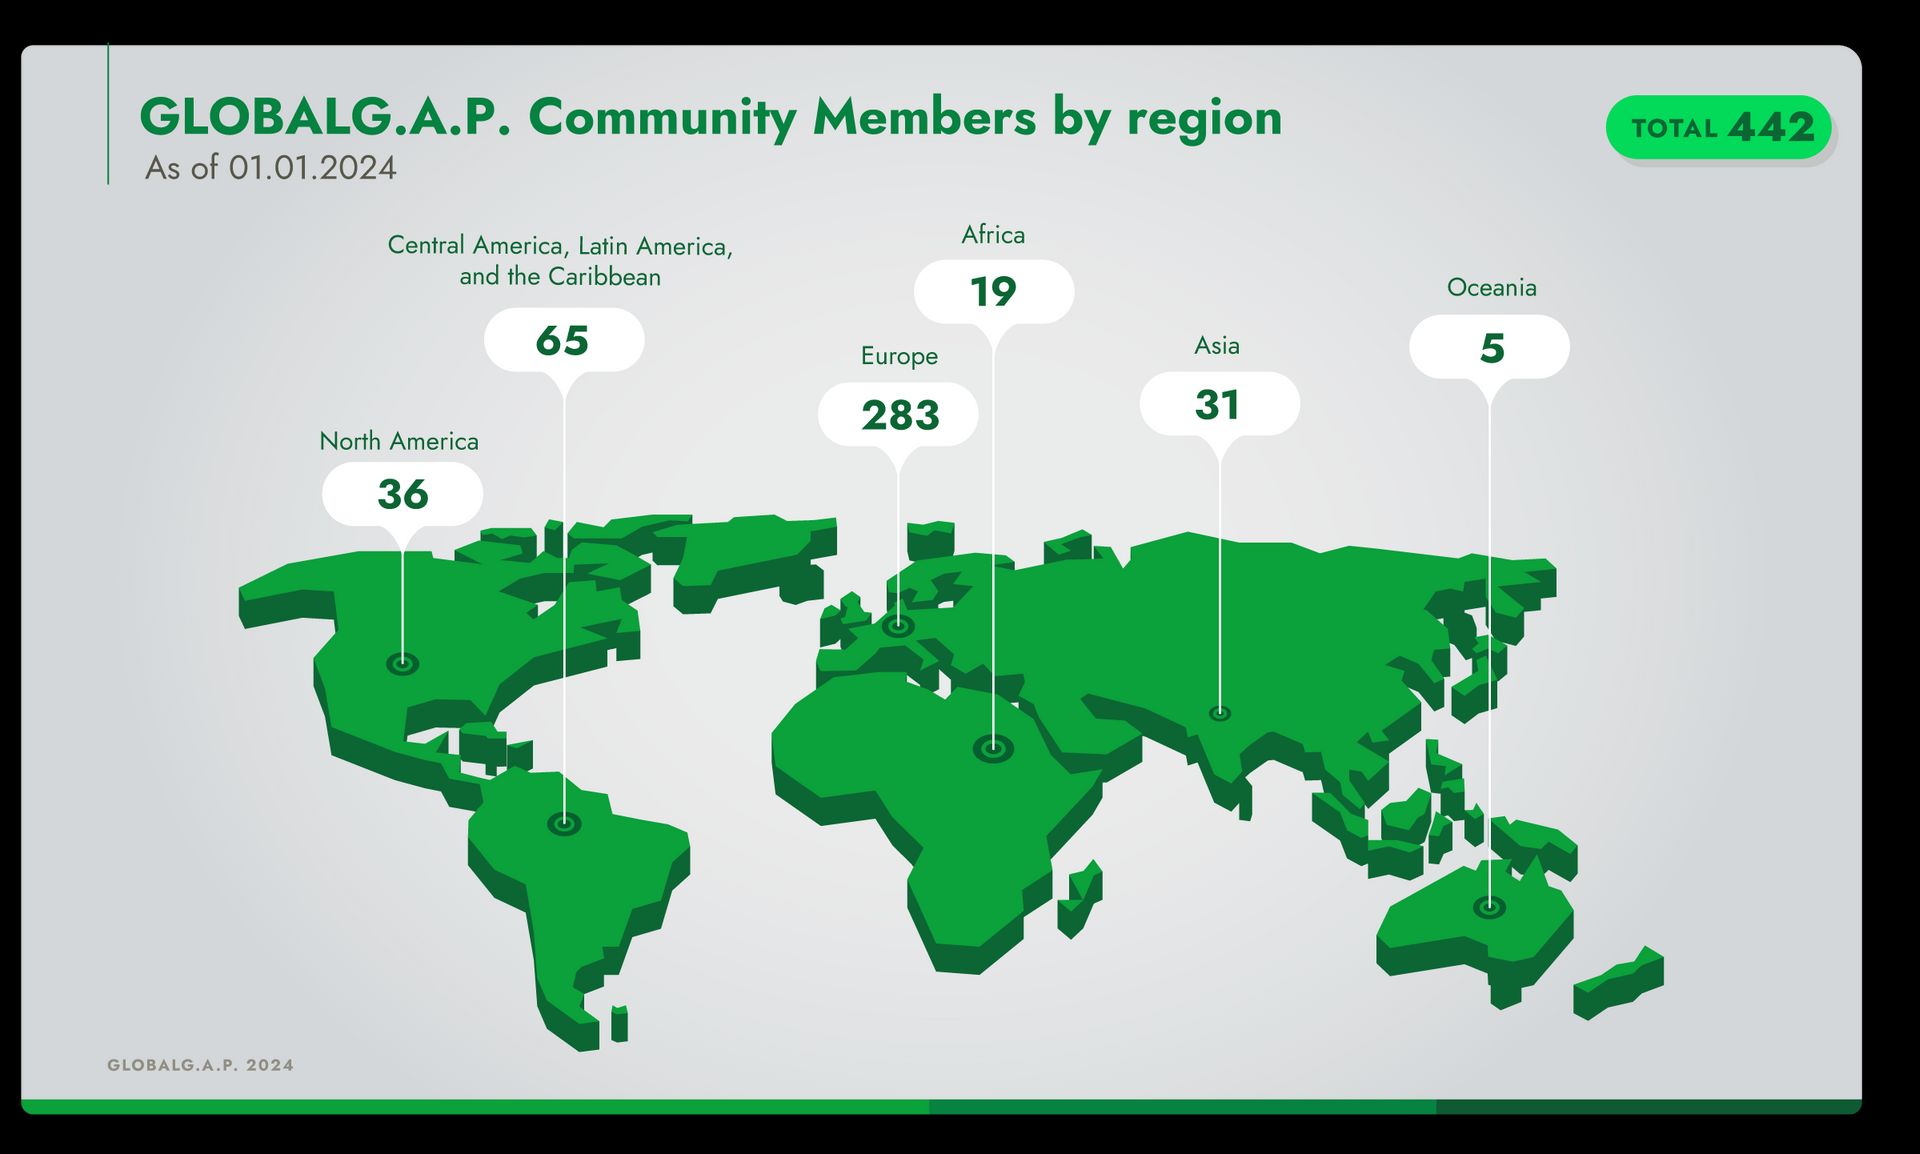 Image showing GLOBALG.A.P. Community Members by region as of 01/01/24